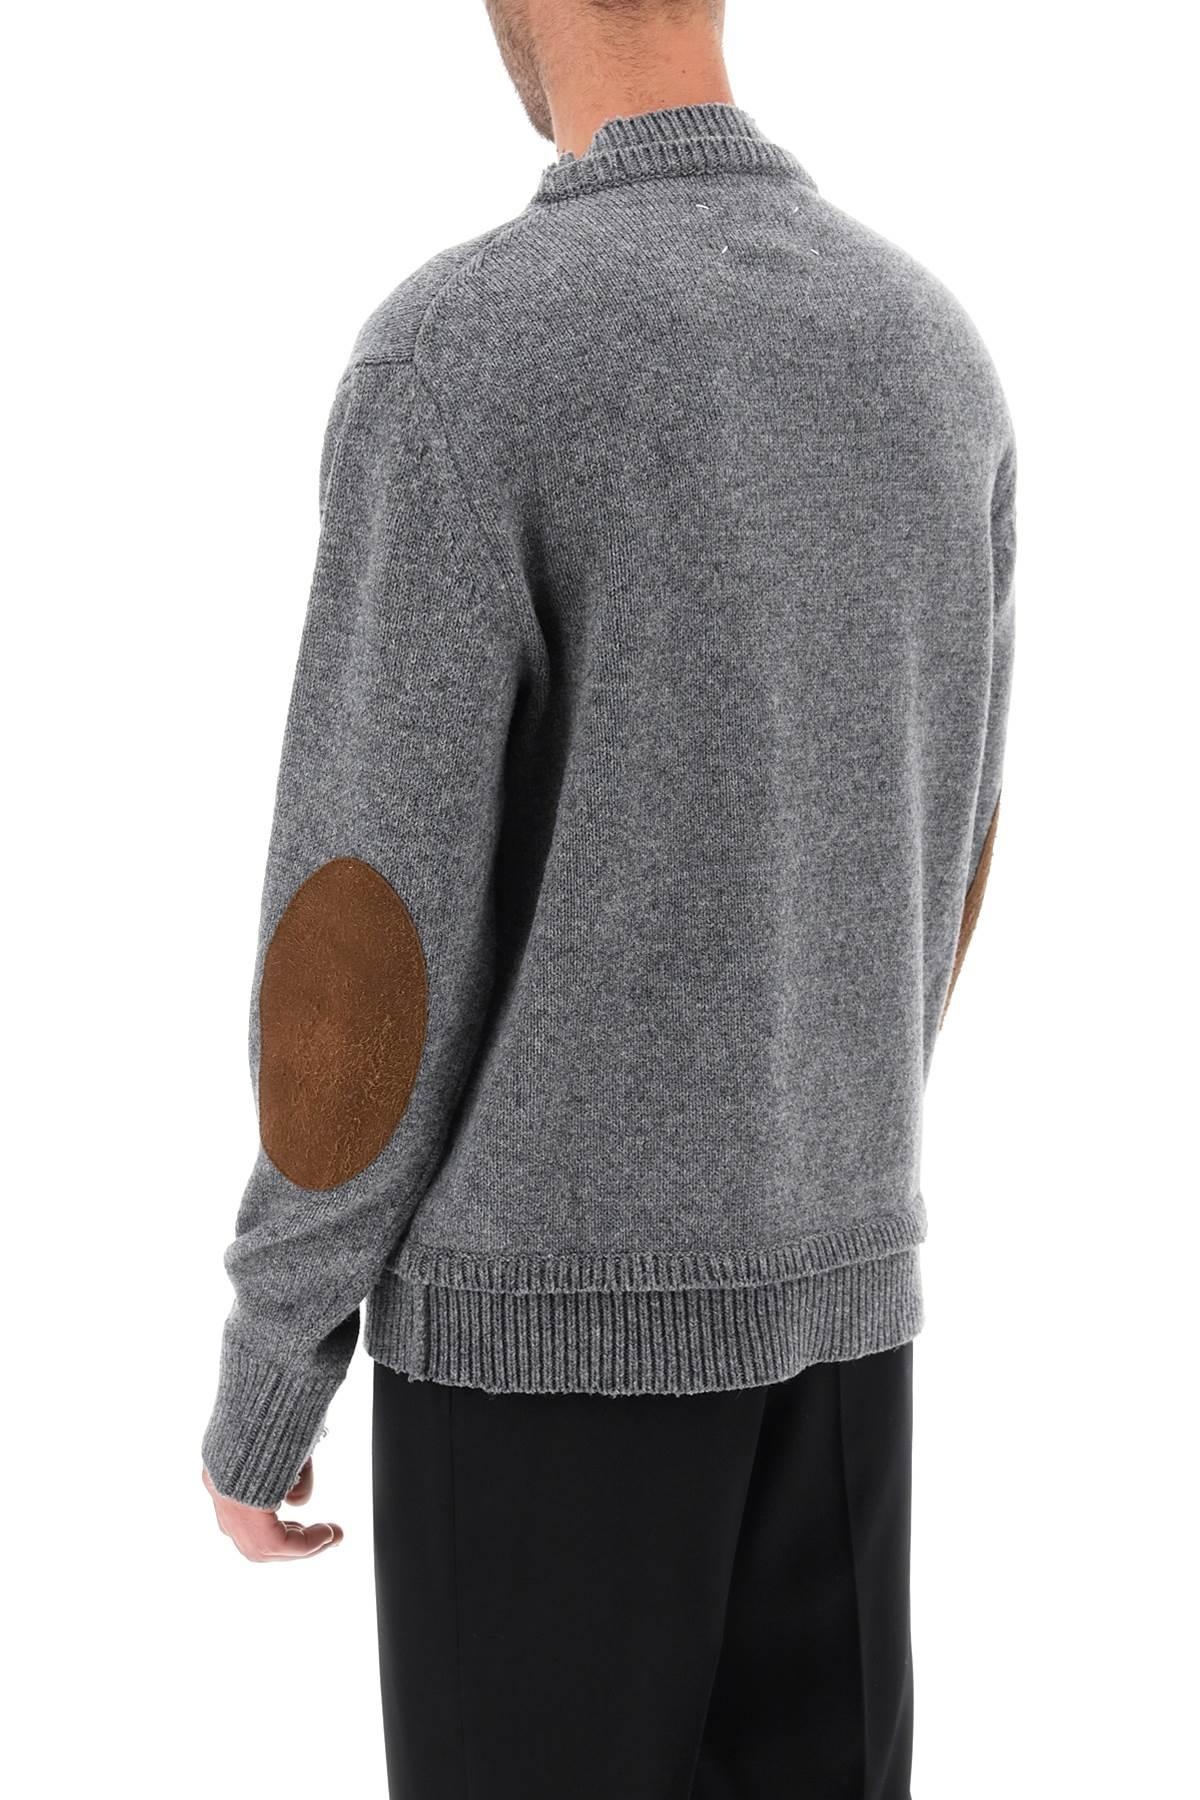 CREW NECK SWEATER WITH ELBOW PATCHES - 4